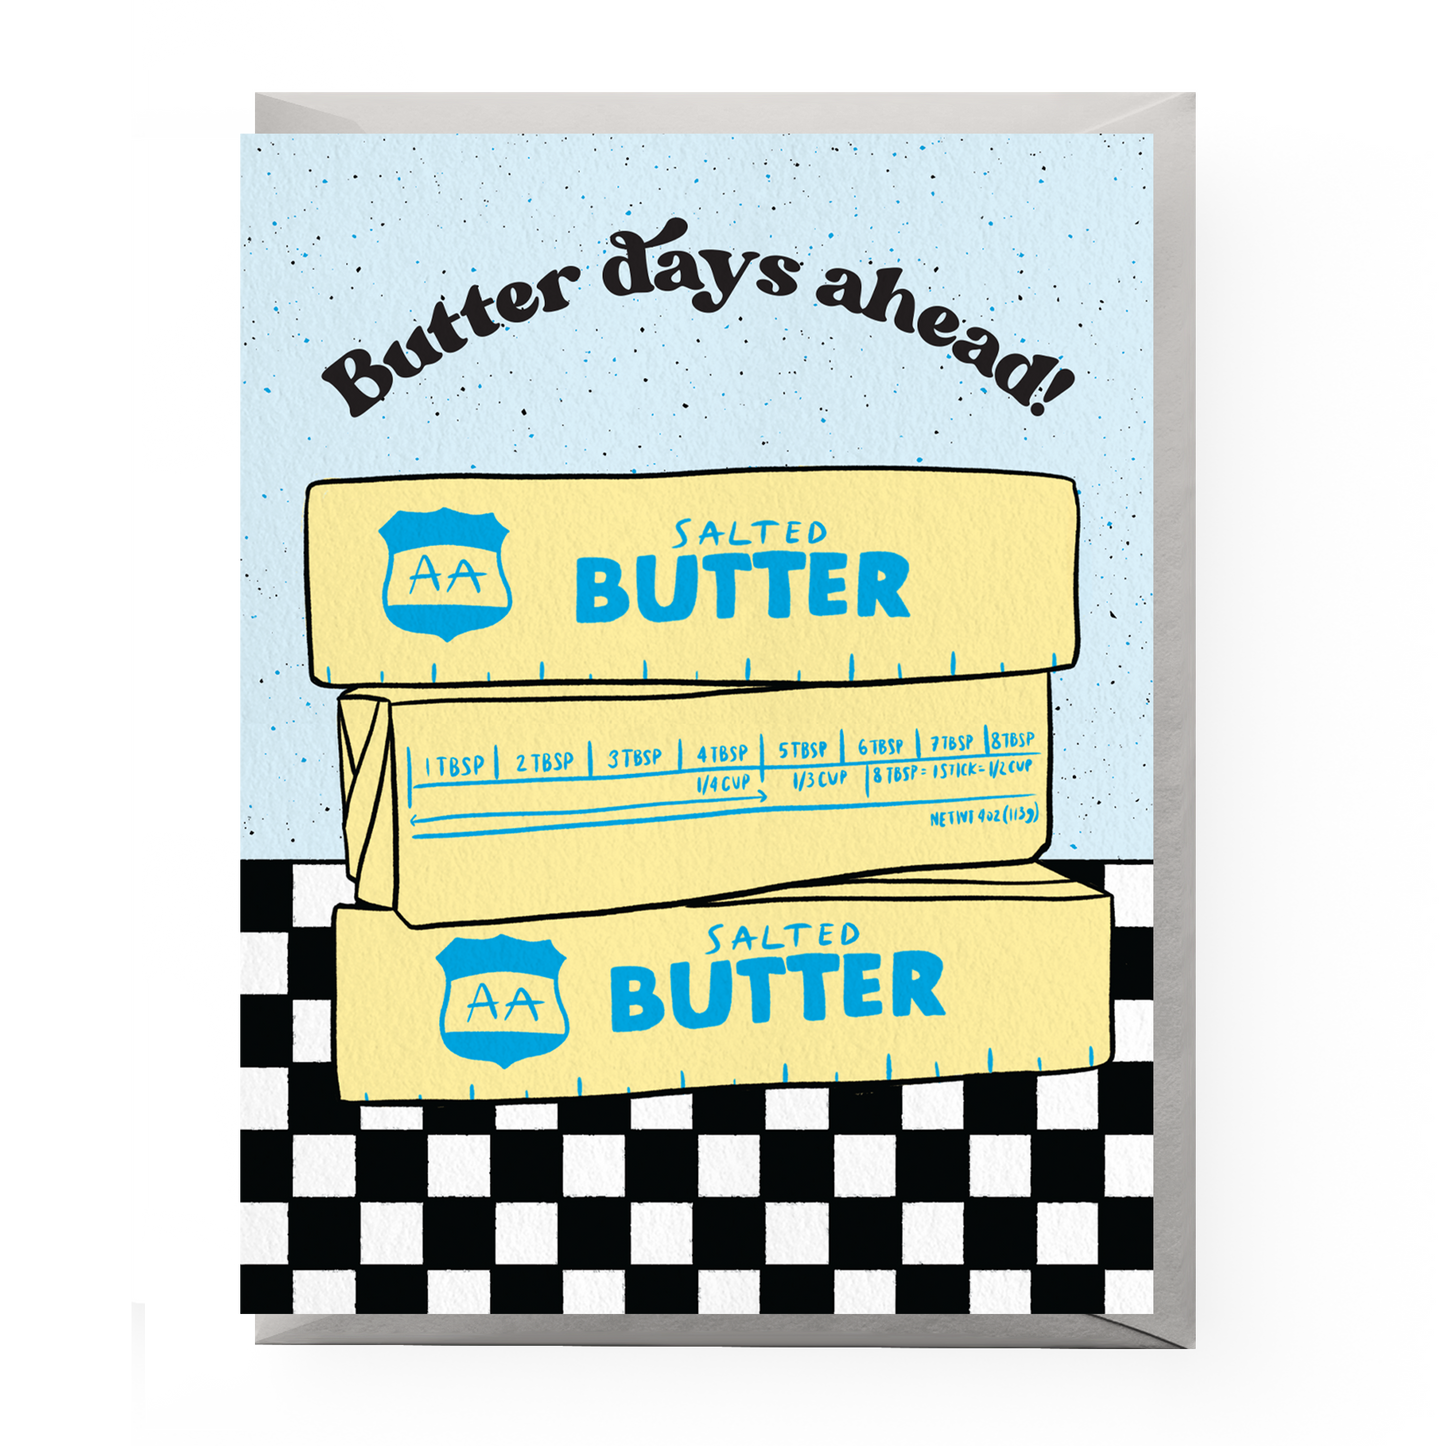 Greeting card that is half speckled light blue on top and white/black checkerboard on the bottom. Top of the card reads "Butter days ahead!" Below it are three sticks of salted butter